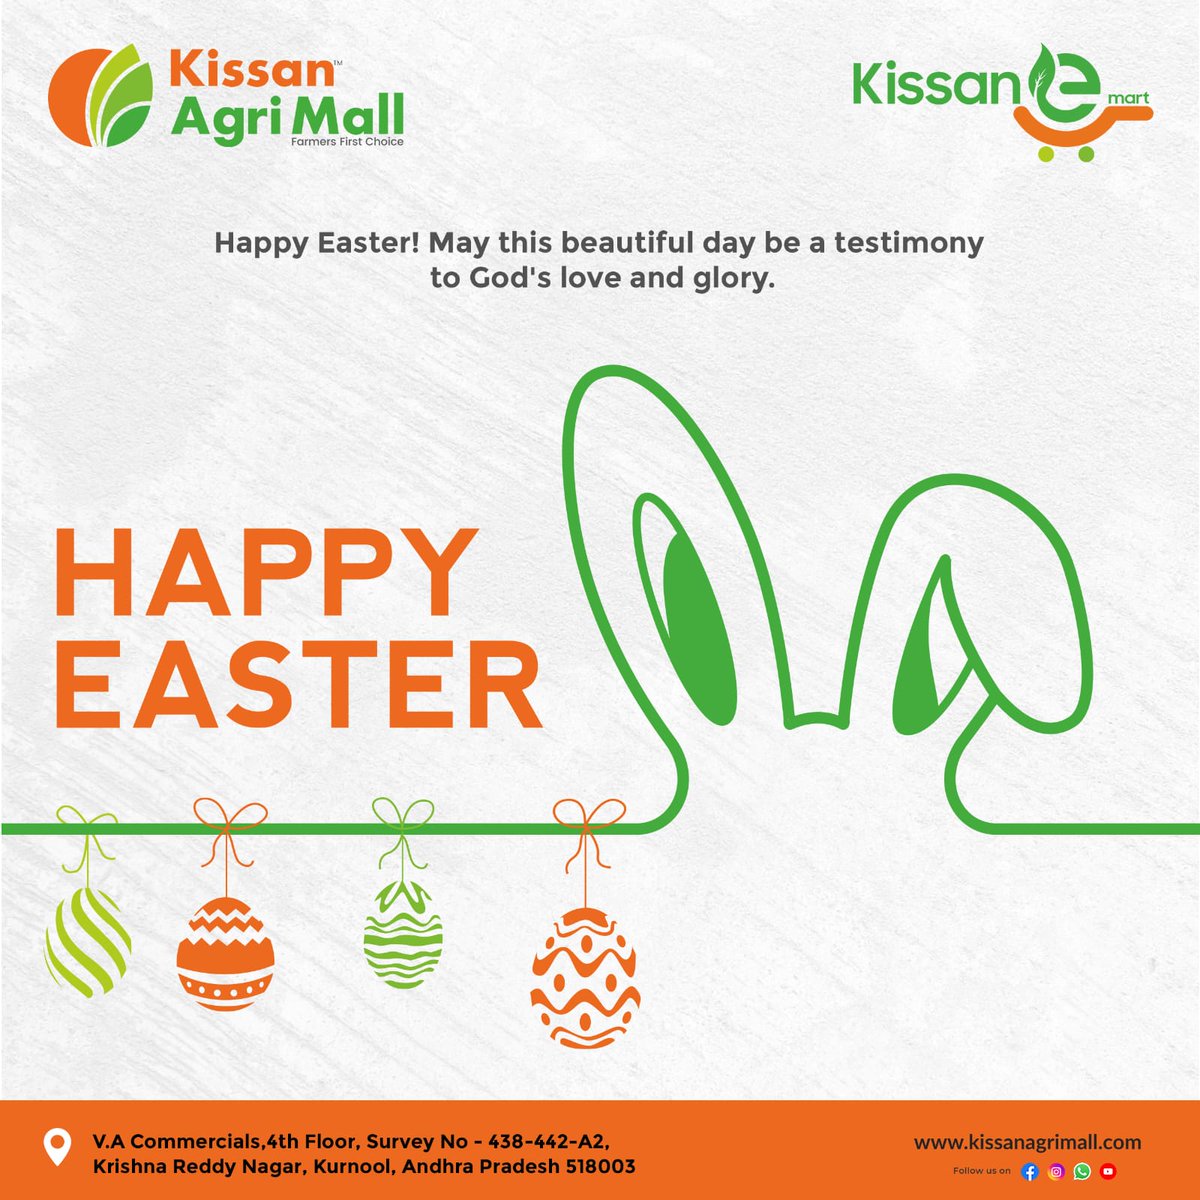 🌼 Happy Easter! 🌼

Join us in celebrating this season of renewal and hope. May the joyful spirit of Easter bring abundance, peace, and overwhelming love to all. 🐣🌸

#EasterBlessings #SpringtimeJoy #KissanAgriMall
🌟🐰🌷